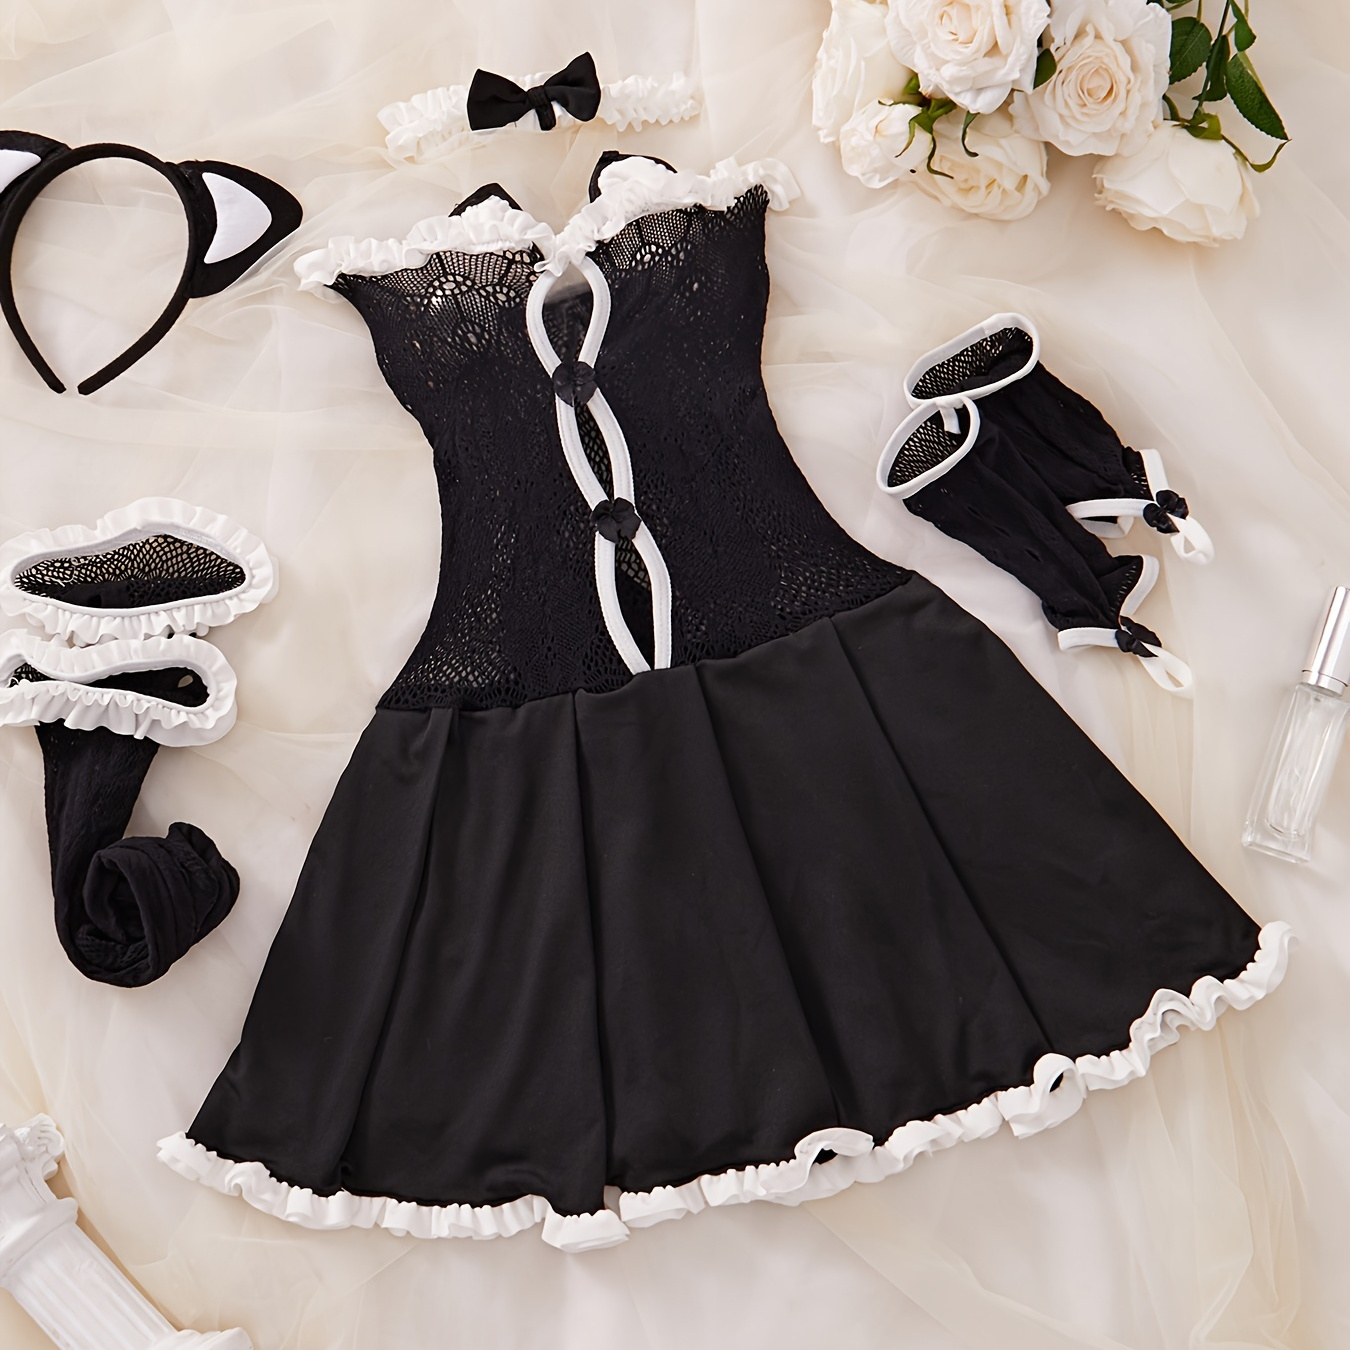 

Naughty Maid Cosplay Costume, Frill Trim Contrast Lace Tube A-line Dress & & Gloves & Stockings & Choker & Headband, Women's Sexy Lingerie & Underwear